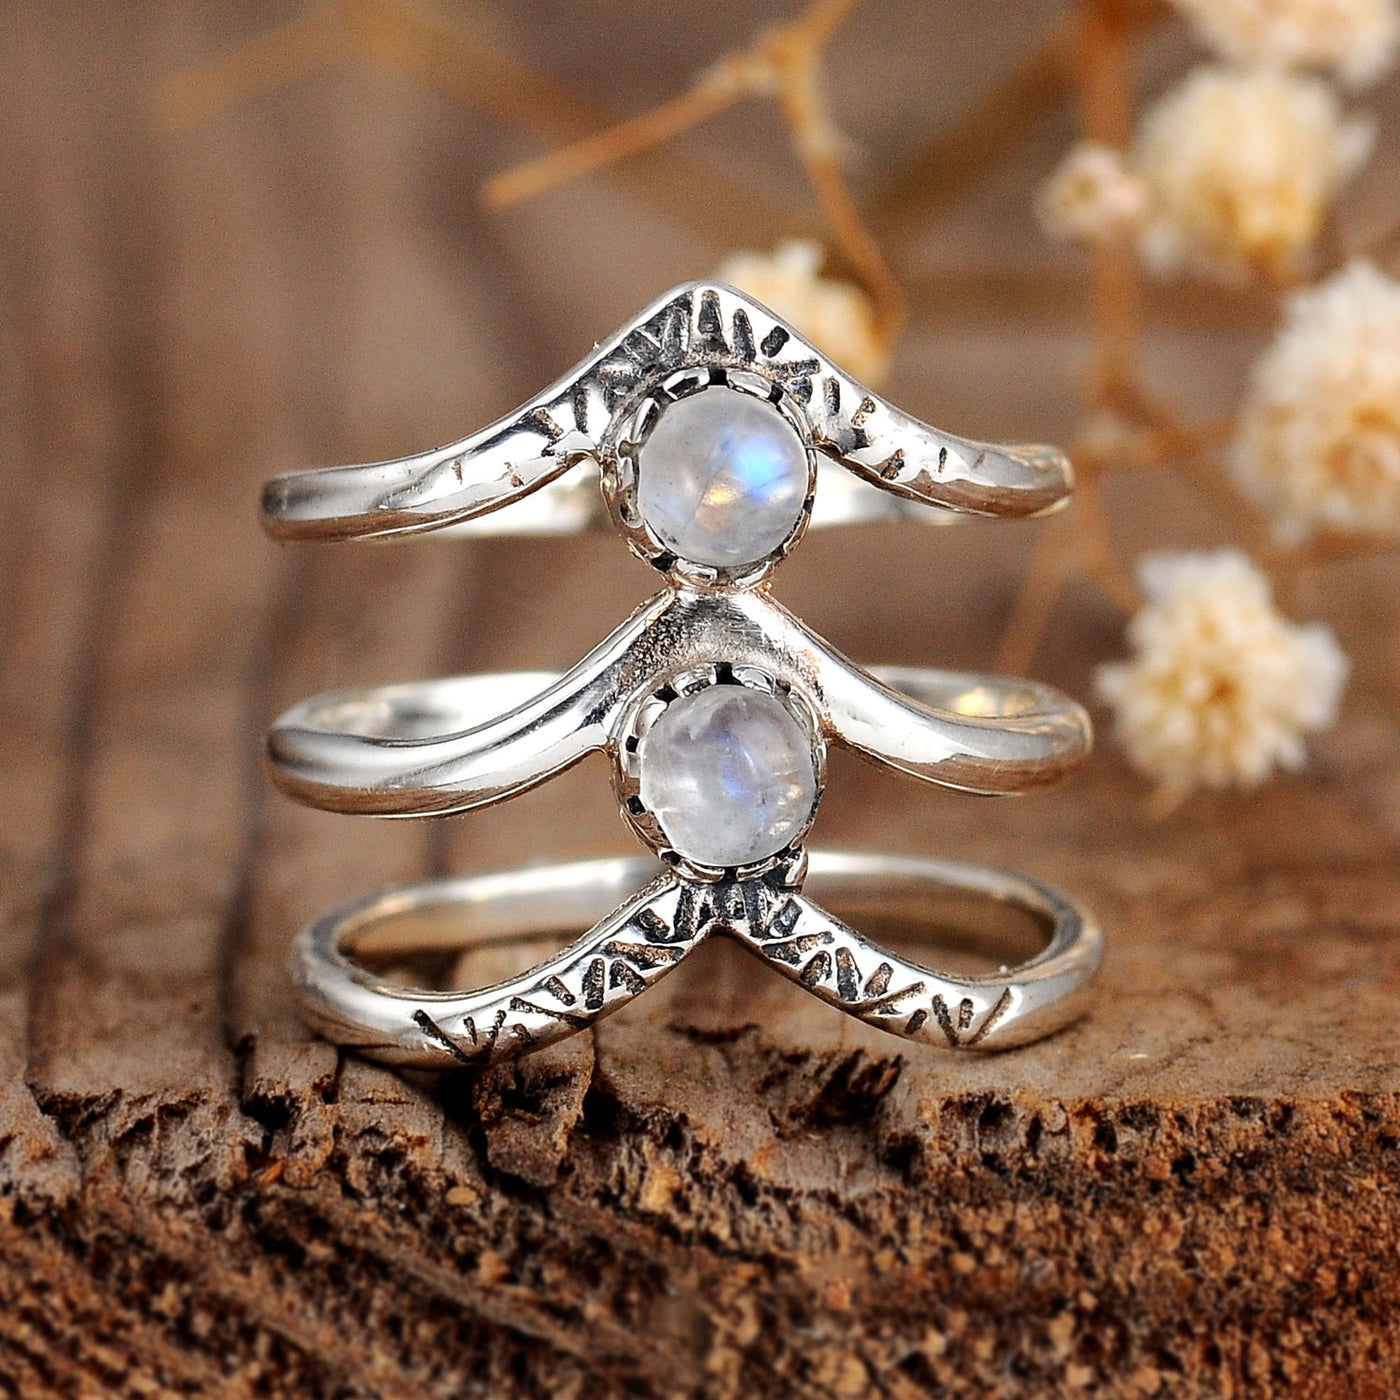 Triple Chevron Boho Ring with Moonstone Sterling Silver